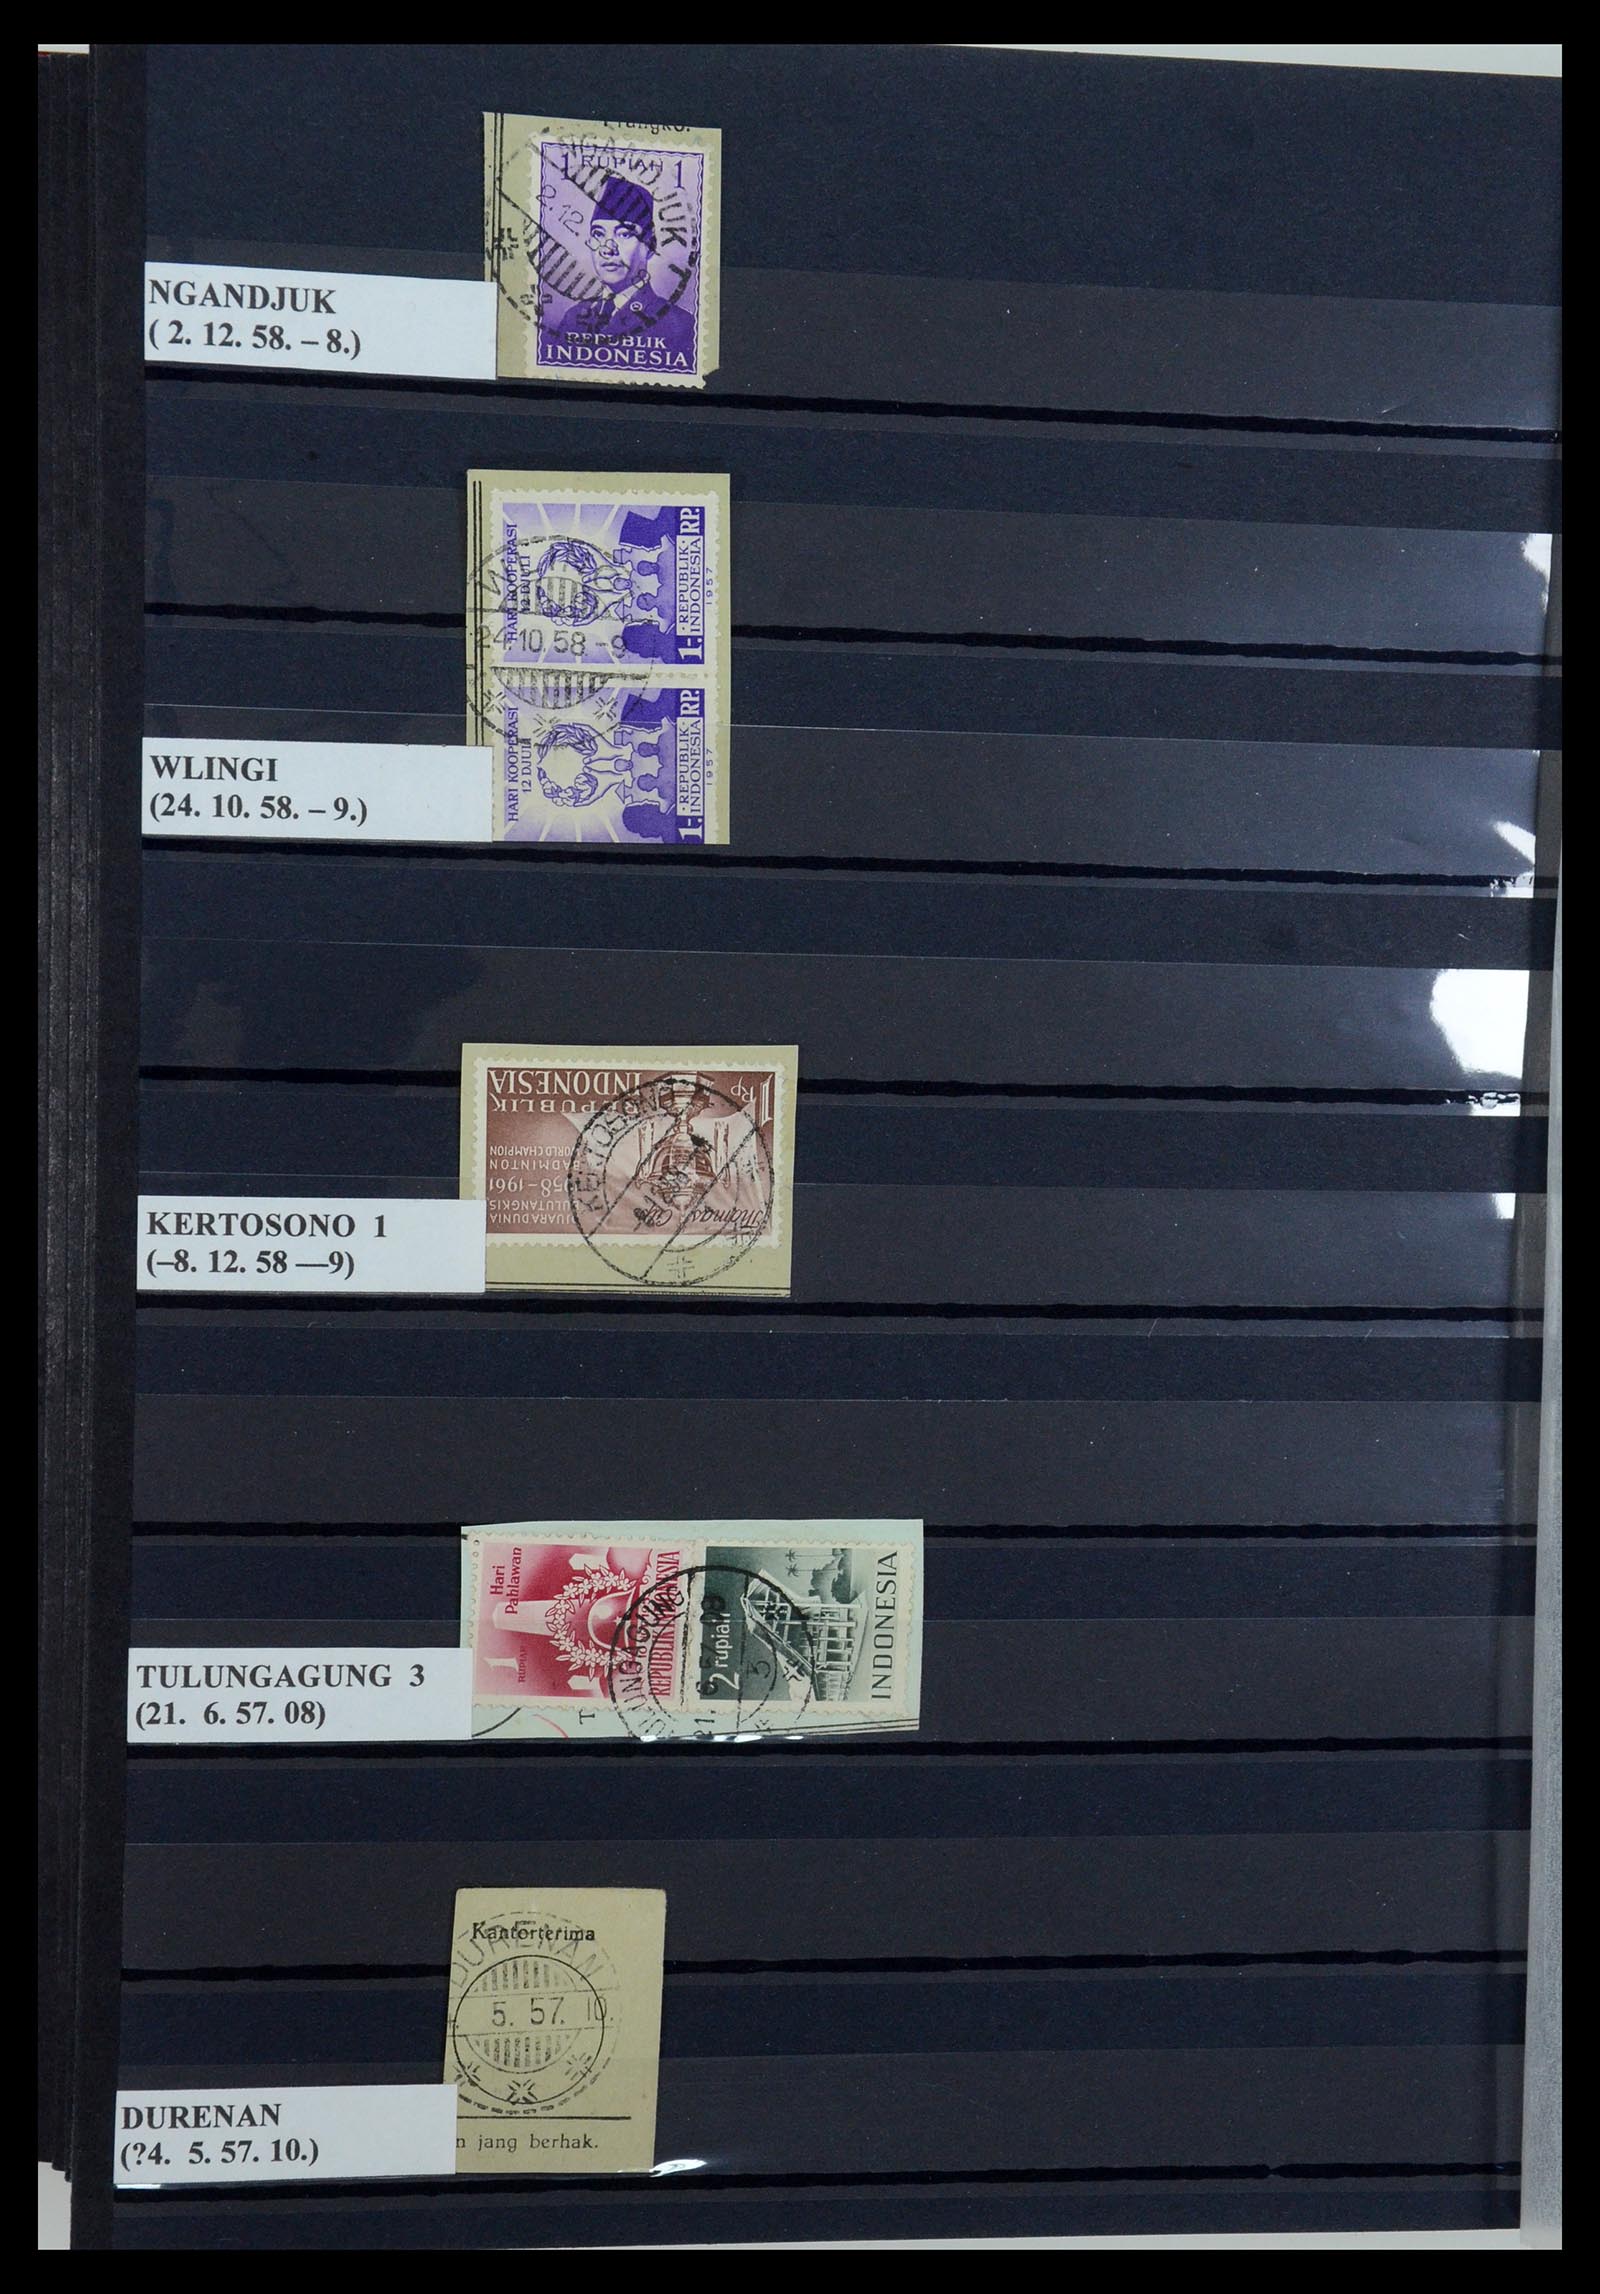 35612 090 - Stamp Collection 35612 Dutch east Indies cancels.